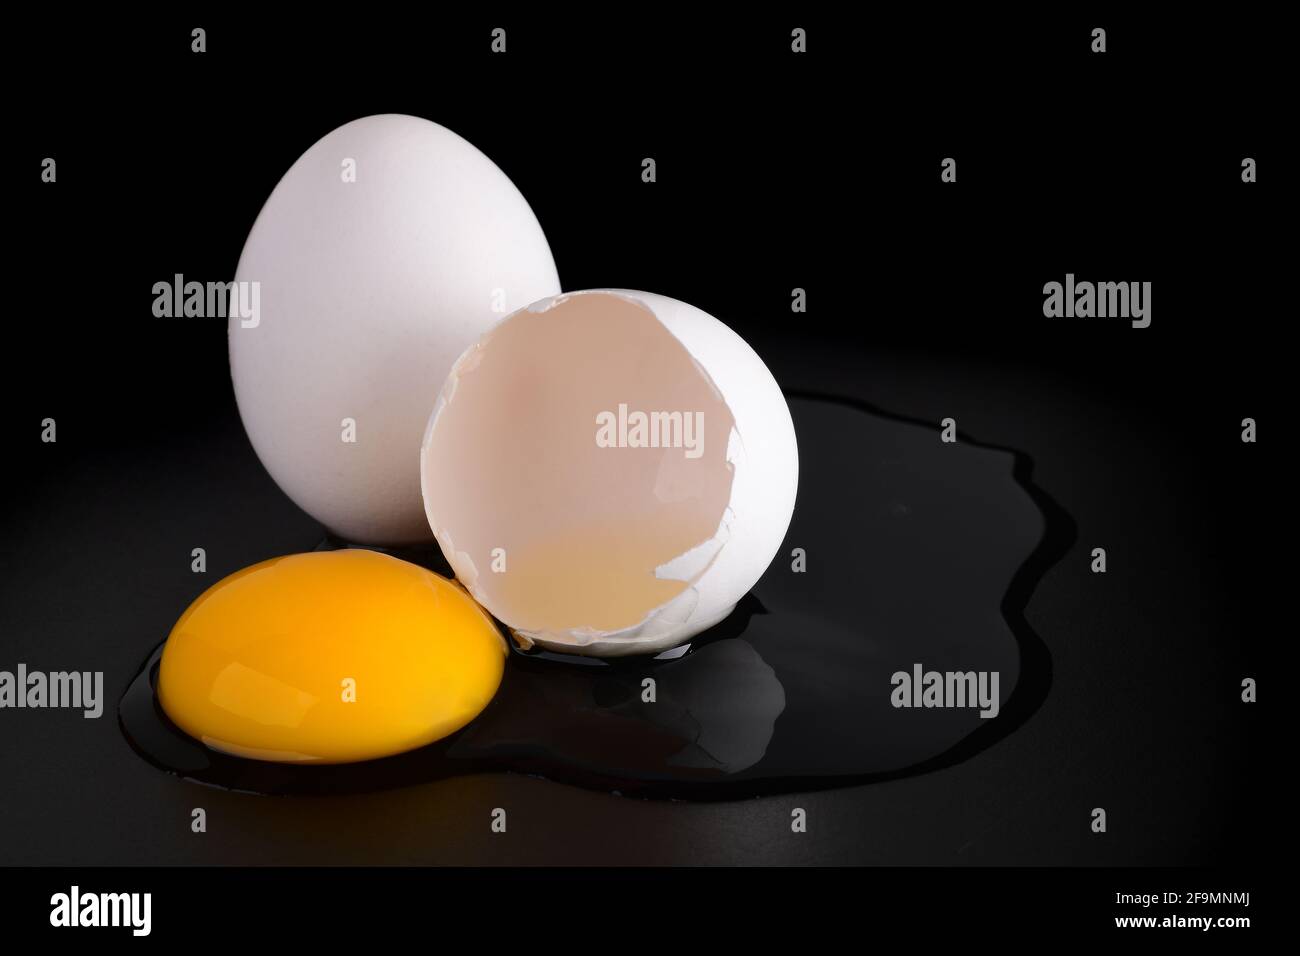 Image of an eggs isolated on dark background Stock Photo